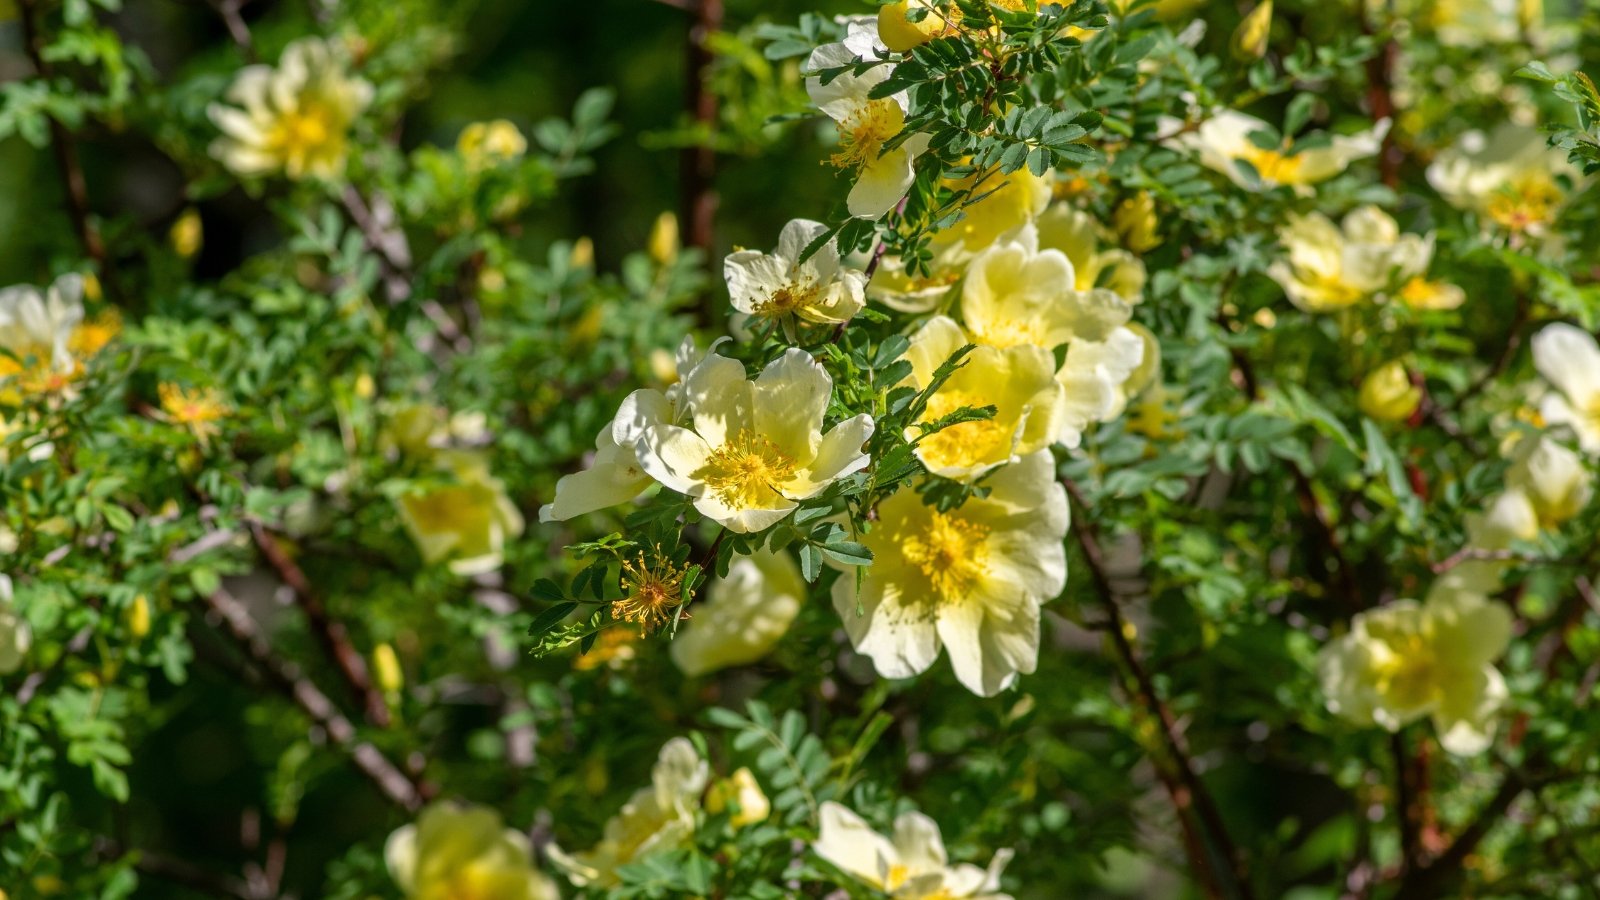 beautiful foliage roses. Close-up of blooming roses 'Father Hugo' which feature gracefully arching stems with finely divided, fern-like leaves and is adorned with abundant, small, pale yellow, single-petaled flowers.